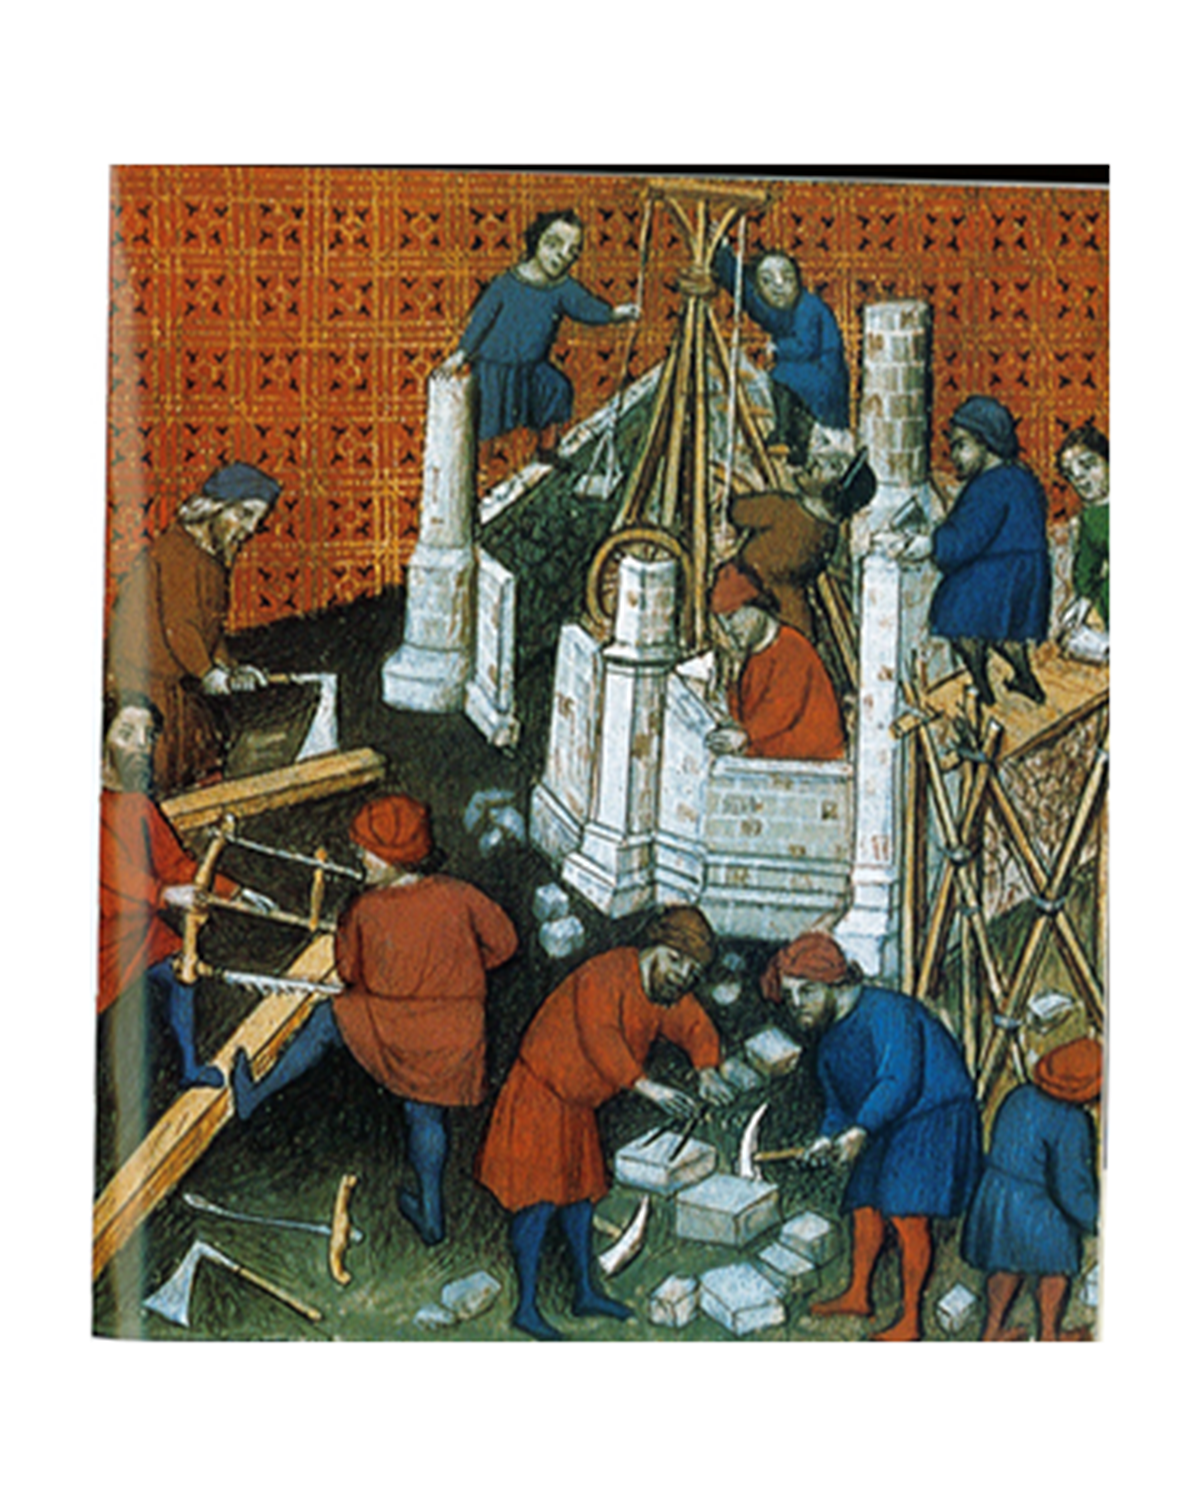 MedCrafts - Crafts regulation in Portugal in Late Middle Ages: 14th and15th centuries image